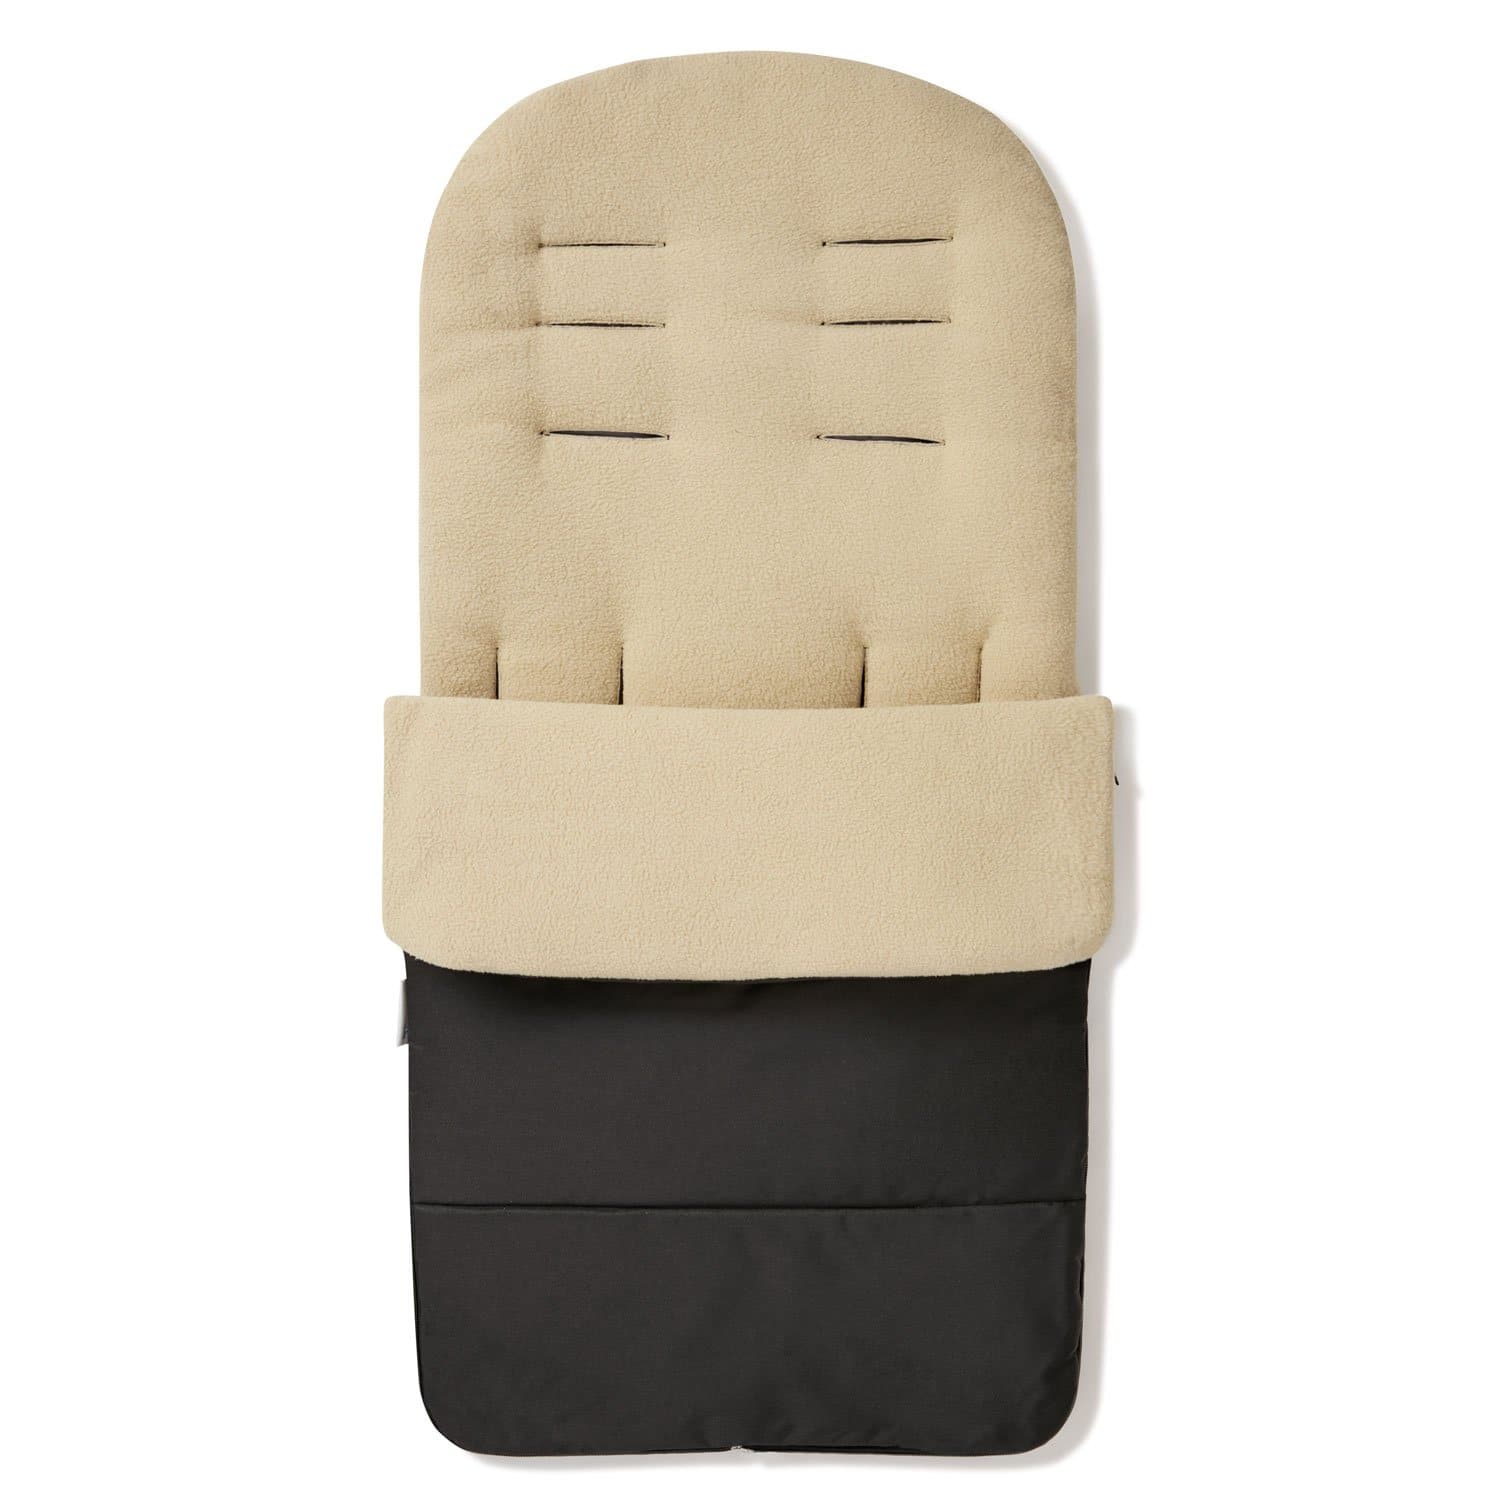 Premium Footmuff / Cosy Toes Compatible with ABC Design - Desert Sand / Fits All Models | For Your Little One